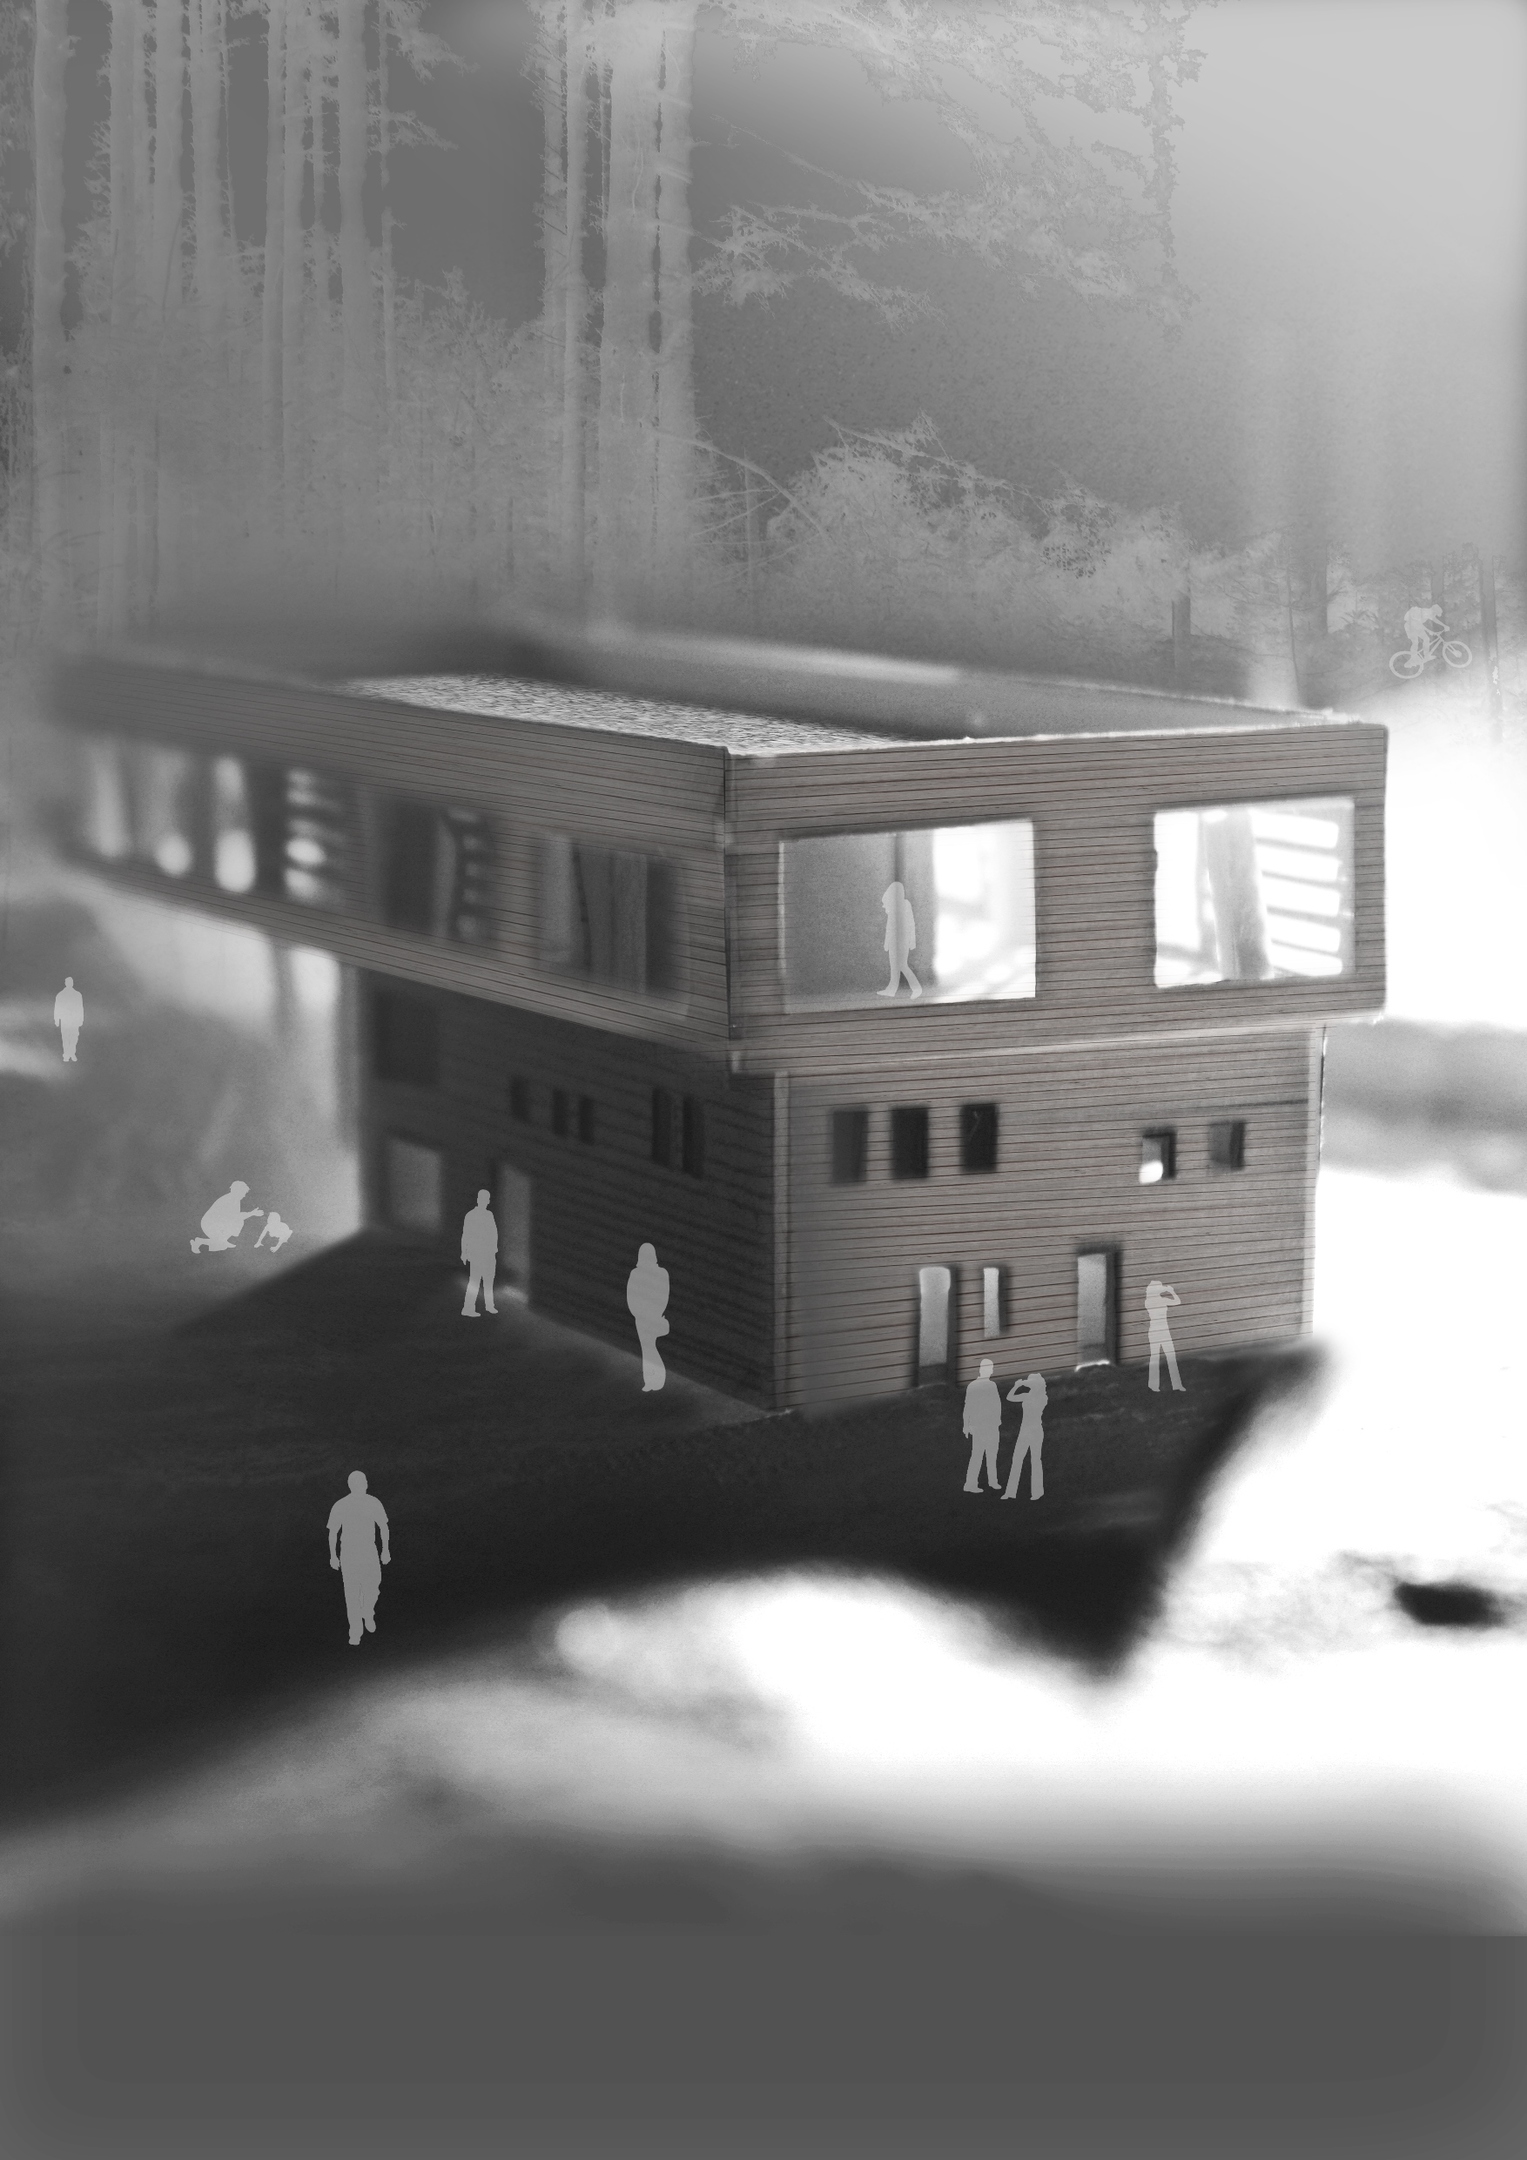 A design for the centre by second year architecture student Johanna Kleesattel